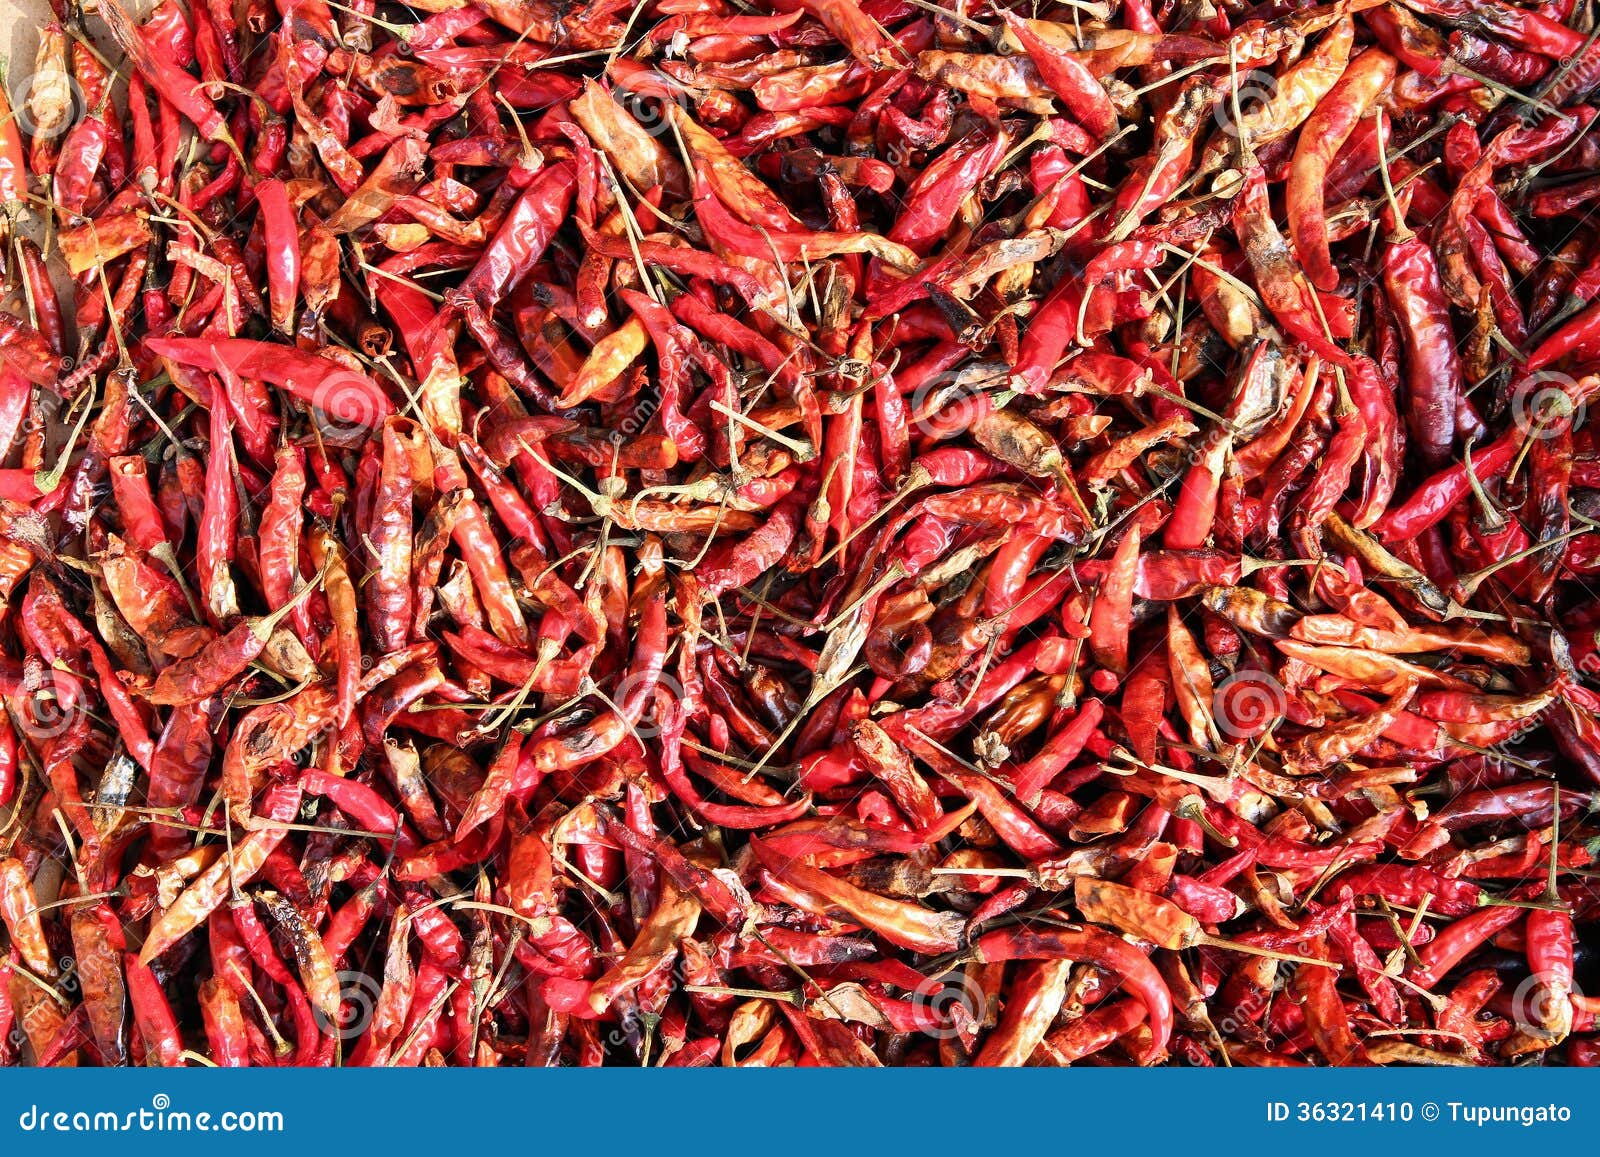 Drying chili peppers stock photo. Image of thailand 